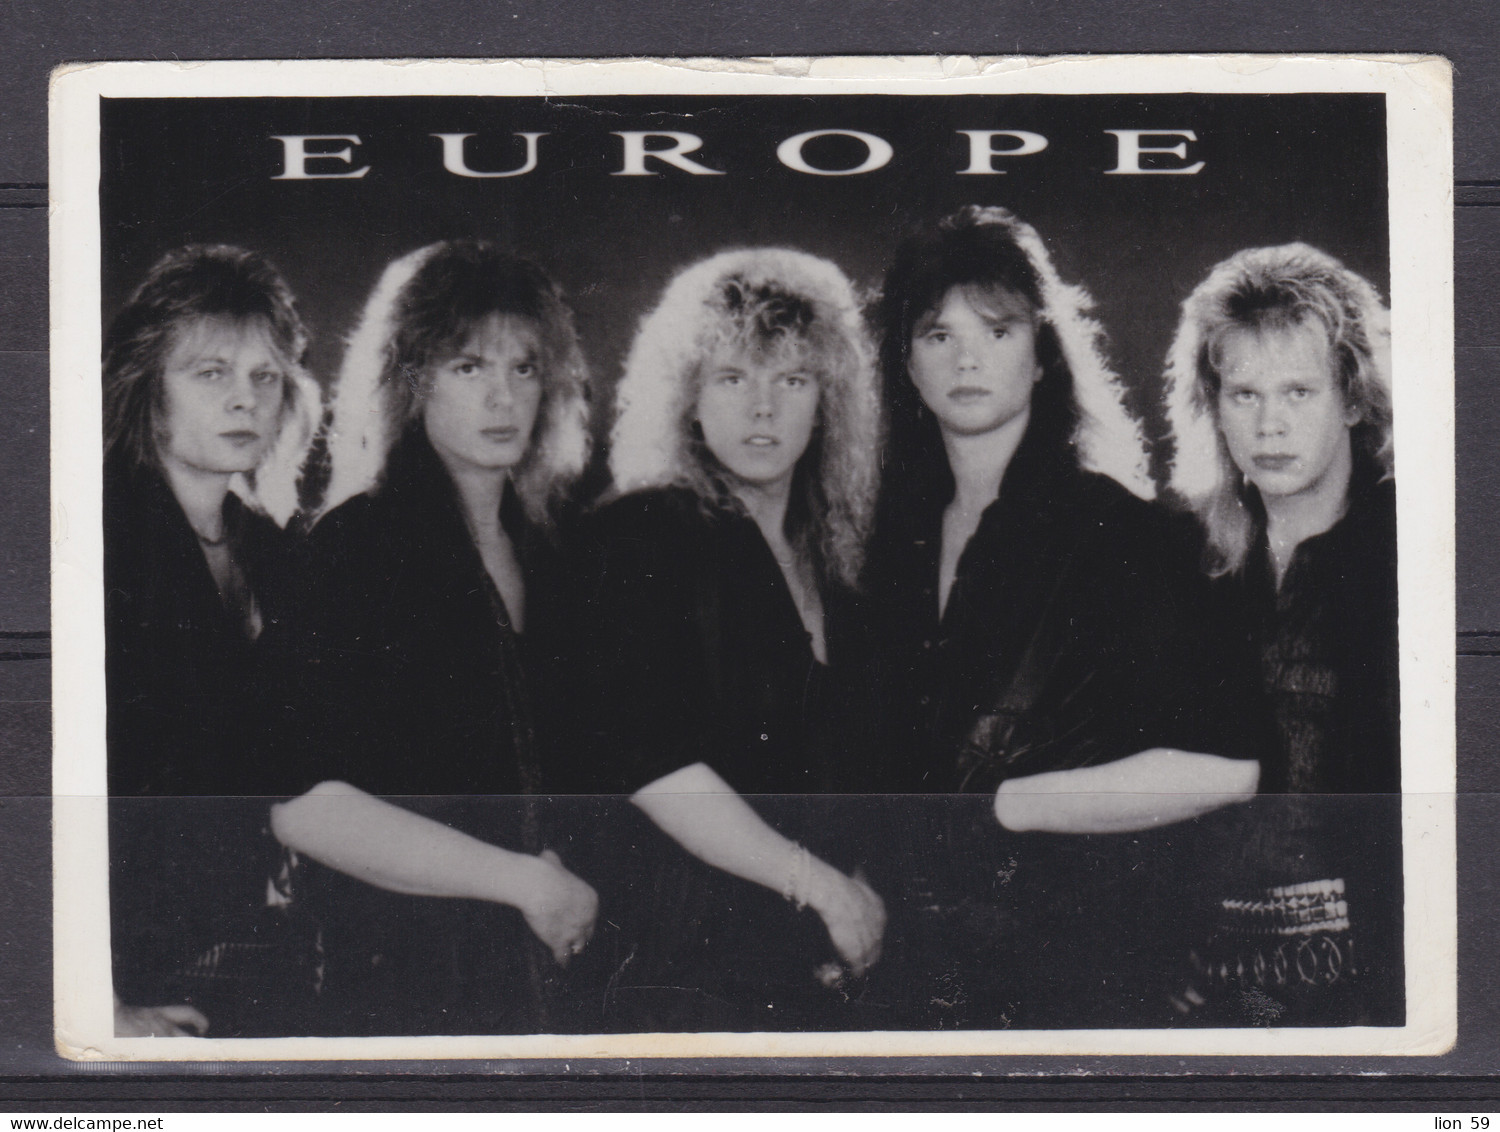 272897 / Europe (band) - Swedish Rock Band Formed In Upplands Väsby, Sweden In 1979, By Frontman Joey Tempest Photo - Photographs